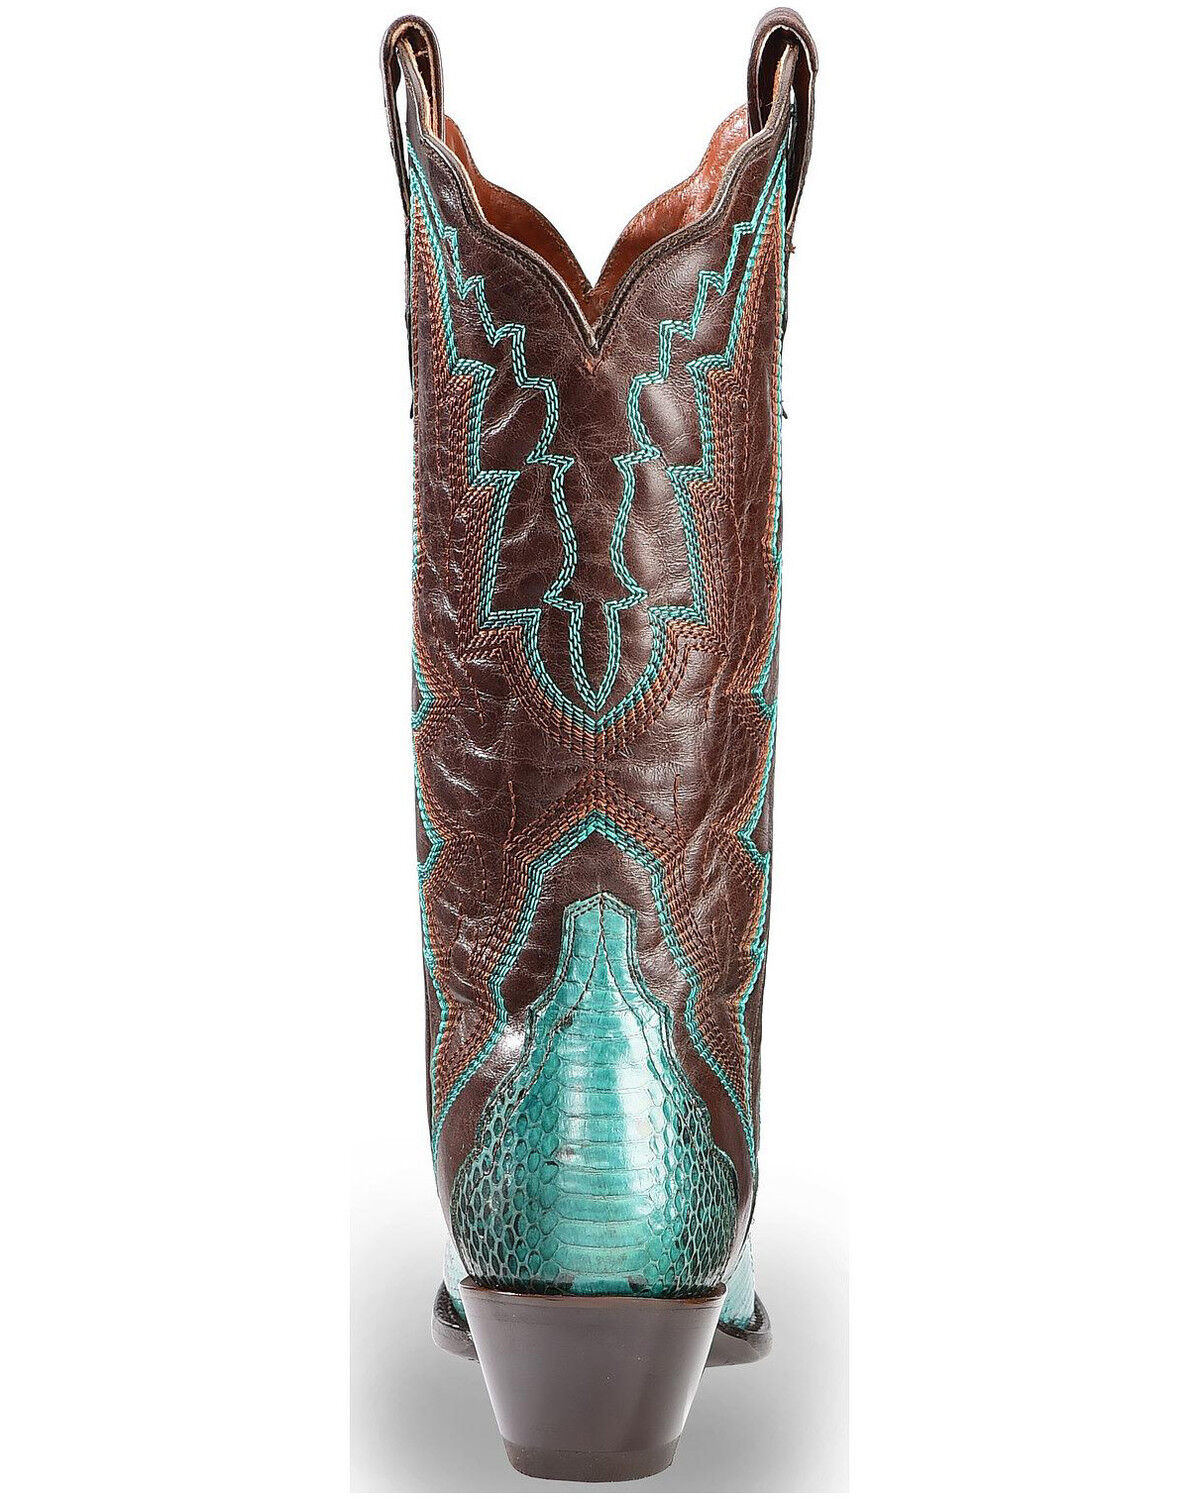 turquoise boots for women